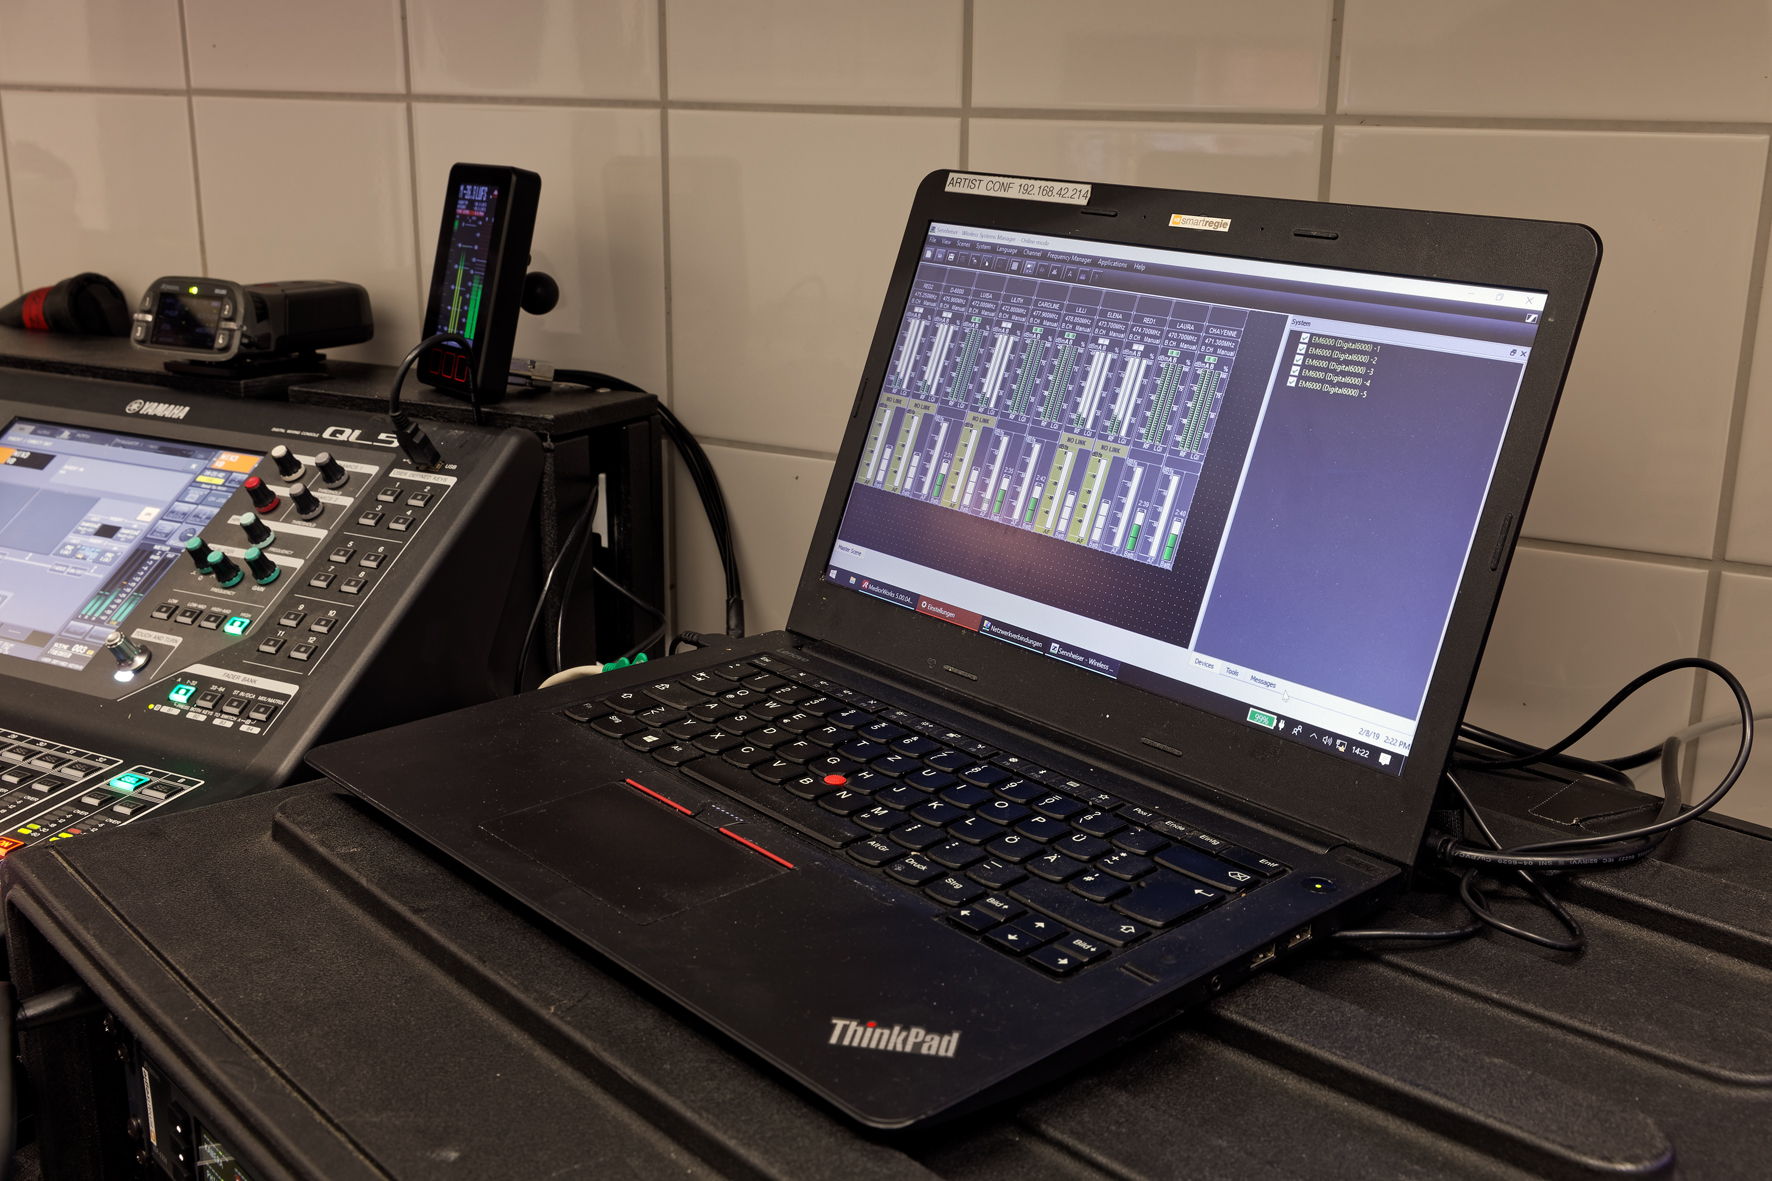 To calculate the suitable transmission frequencies, smartregie GmbH uses Sennheiser’s WSM software (Wireless Systems Manager), which also serves the purpose of controlling and monitoring the Digital 6000 systems that are connected